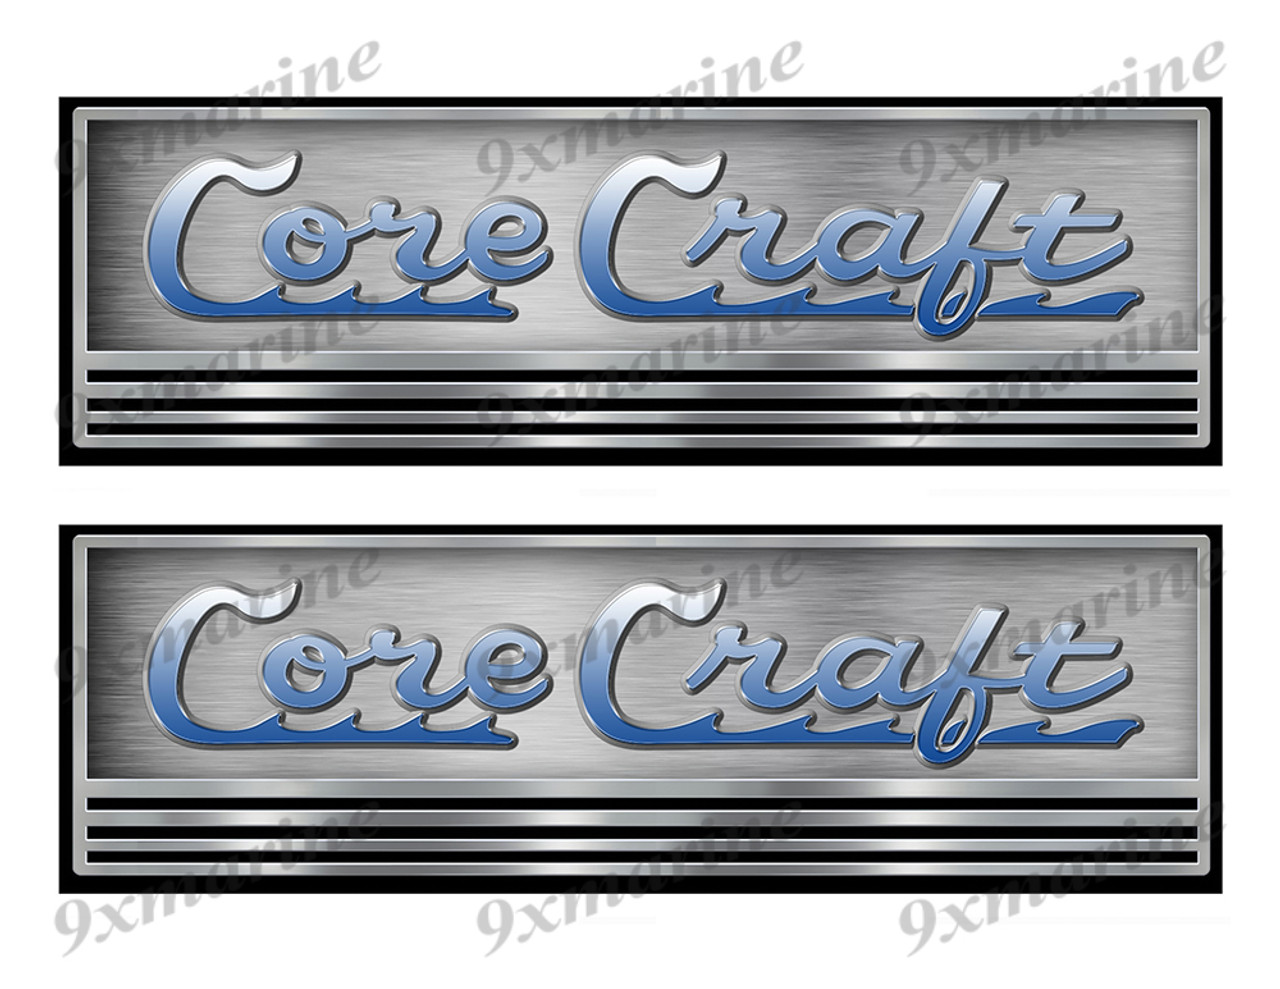 Two Core Craft Boat Stickers. Not OEM